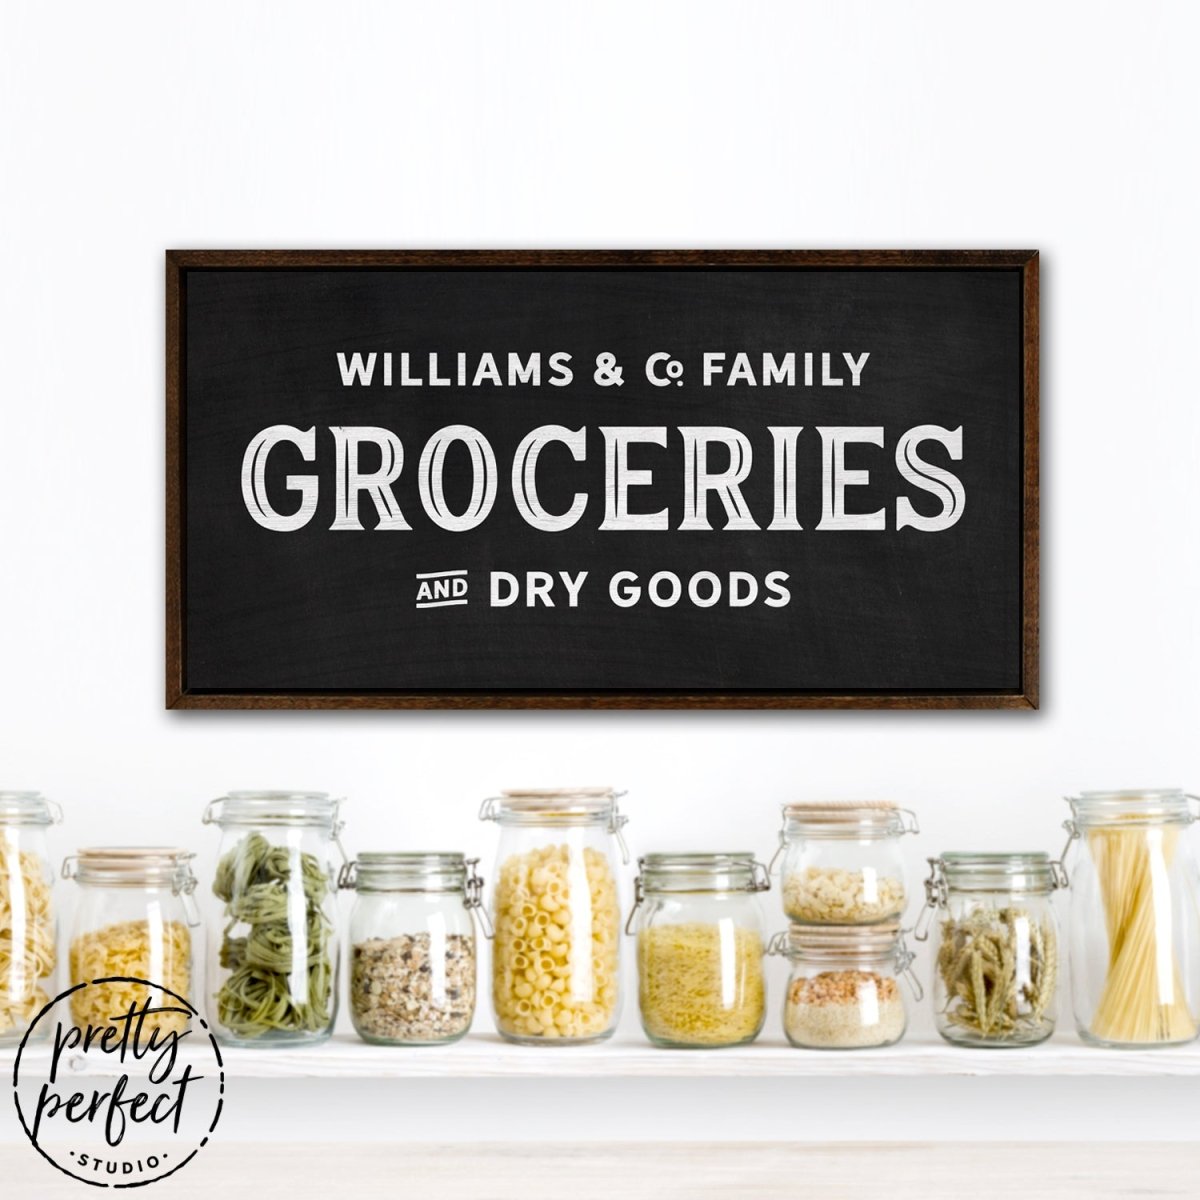 Personalized Family Grocery Sign Hanging on Wall in Kitchen - Pretty Perfect Studio